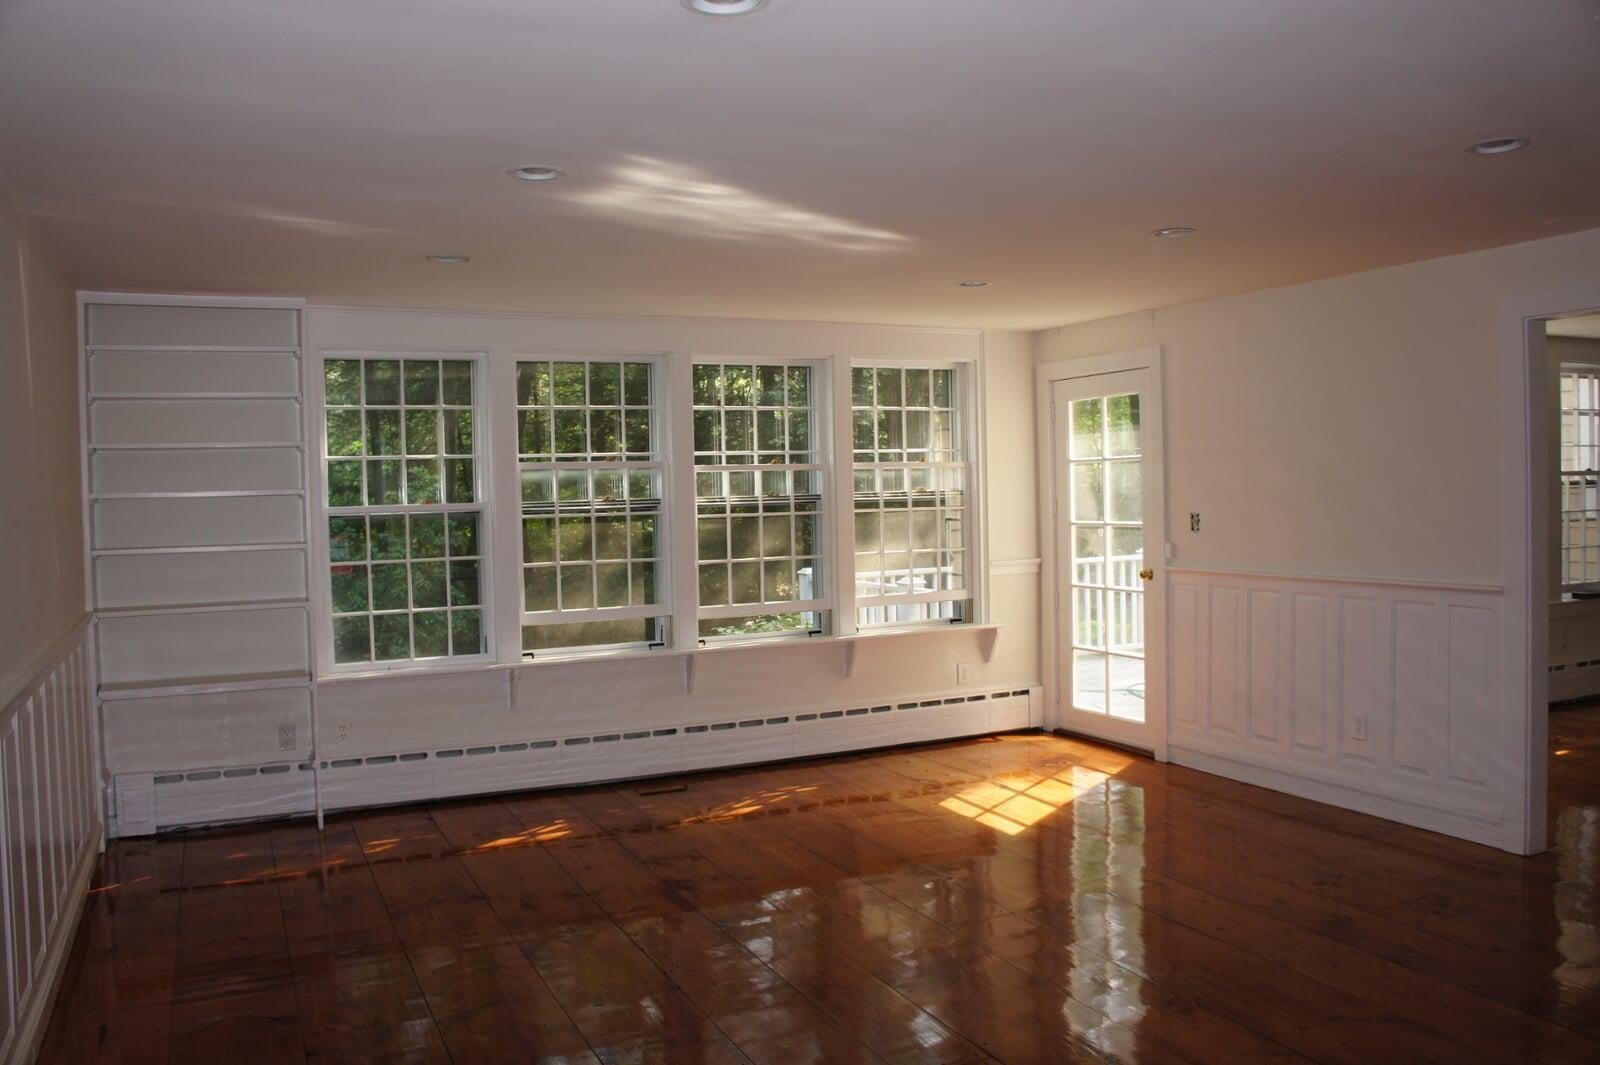 Interior, handyman, service, metrowest, Greater Boston, Boston, Spray, cabinet, kitchen, paint, painting, power washing, interior painting, kitchen cabinets, Exterior Painting, spraying, Ceiling, Dry wall repair, repair, leaks, faucet, toilet, staining, cleaning, Home Property Maintenance, Home maintenance, maintenance, Home Property maintenance, Exterior Painting, electrical Repair, hanging items, Fix leaks, carpentry work, gutters 